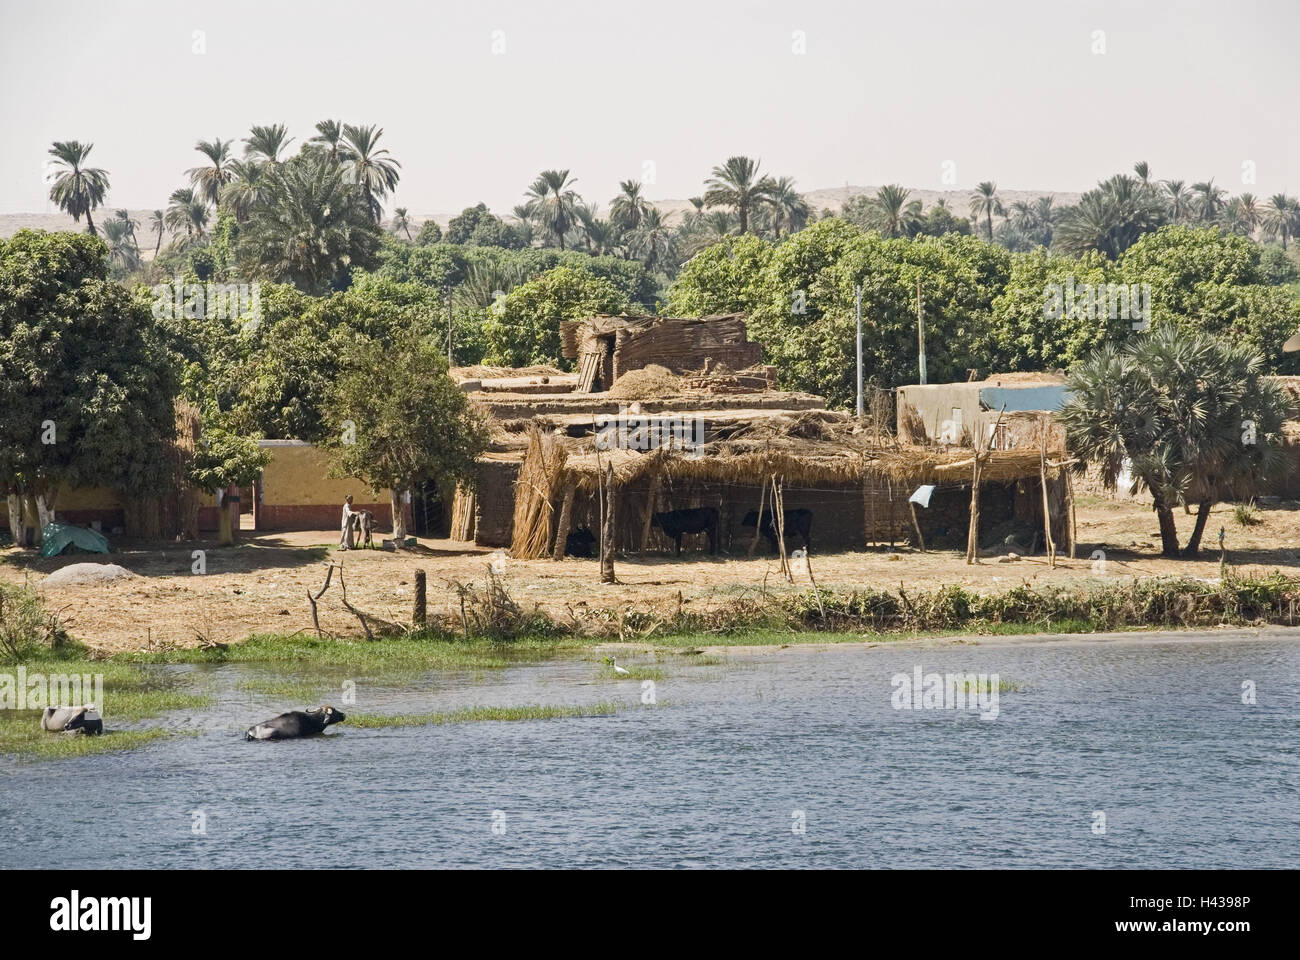 Egypt, Edfu, town view, the Nile, water buffalo, shore, straw hut, Upper Egypt, river, waters, benefit animals, cooling, riverside, hut, dwellings, simply, simply, wood, palms, Nile scenery, Stock Photo